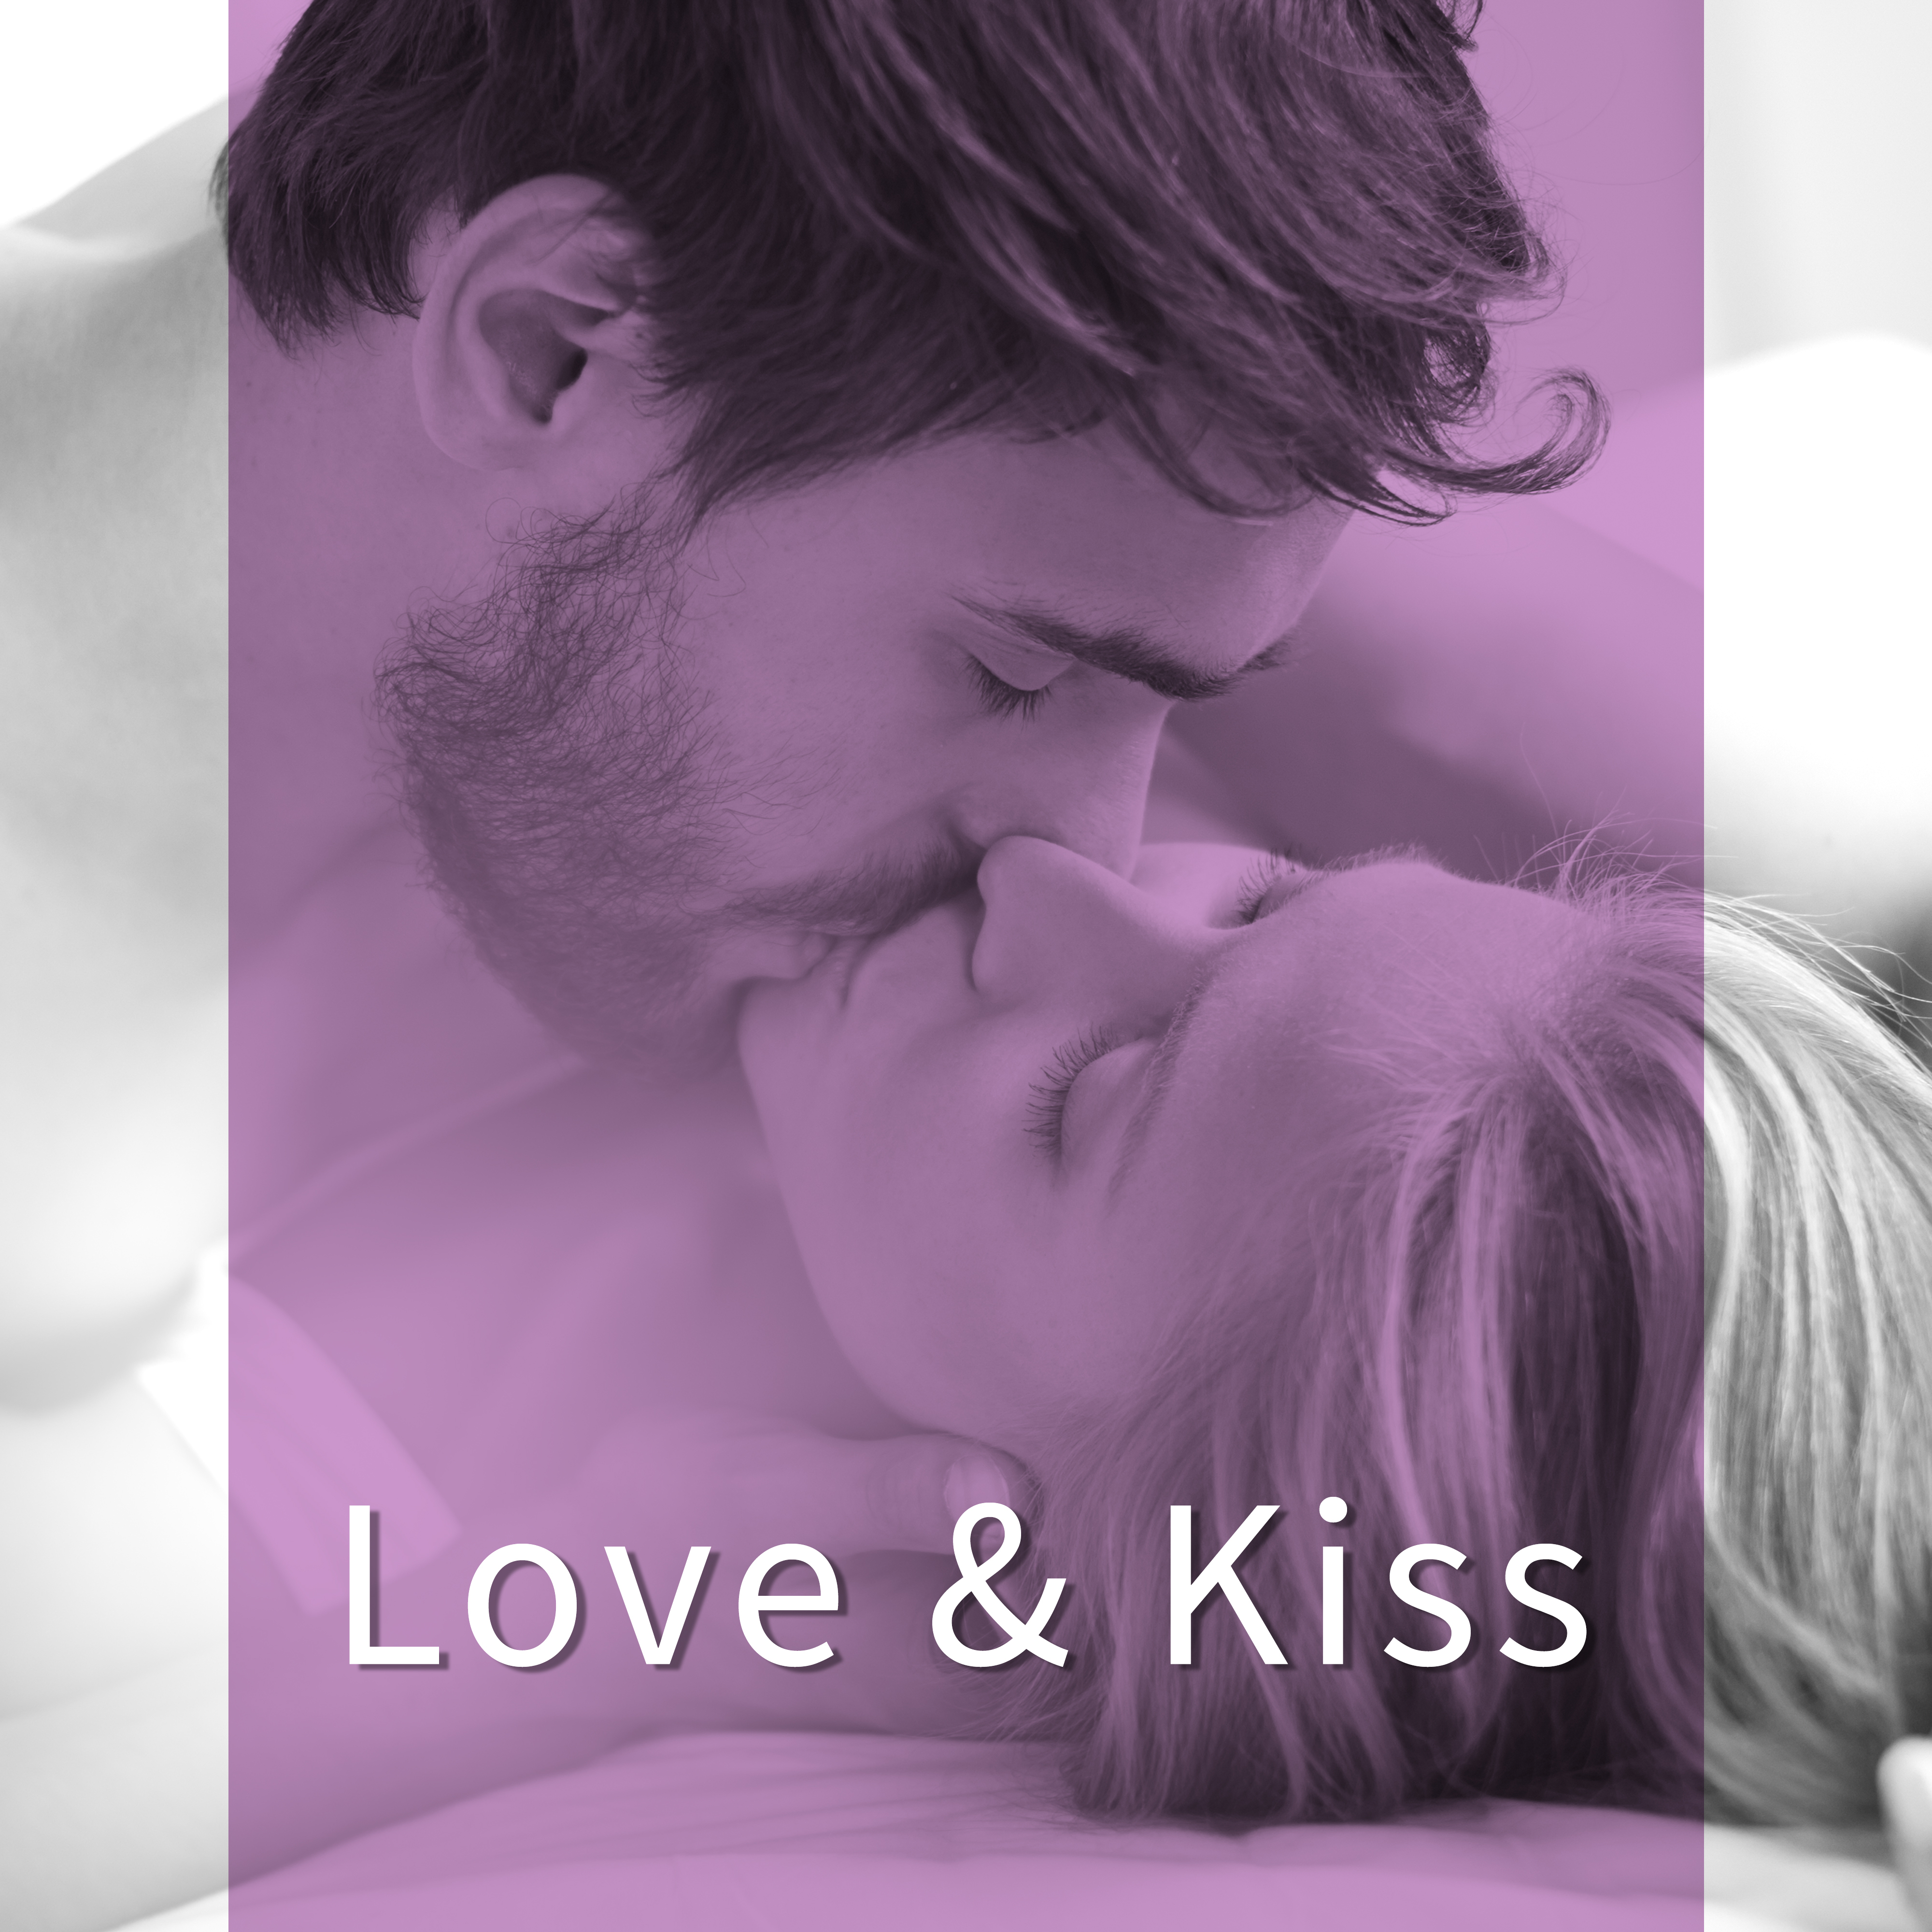 Love  Kiss  Romantic Music for Lovers, True Love, Pure Feeling, Erotic Music, Mellow Jazz at Night, Sensual Massage, Rest for Two